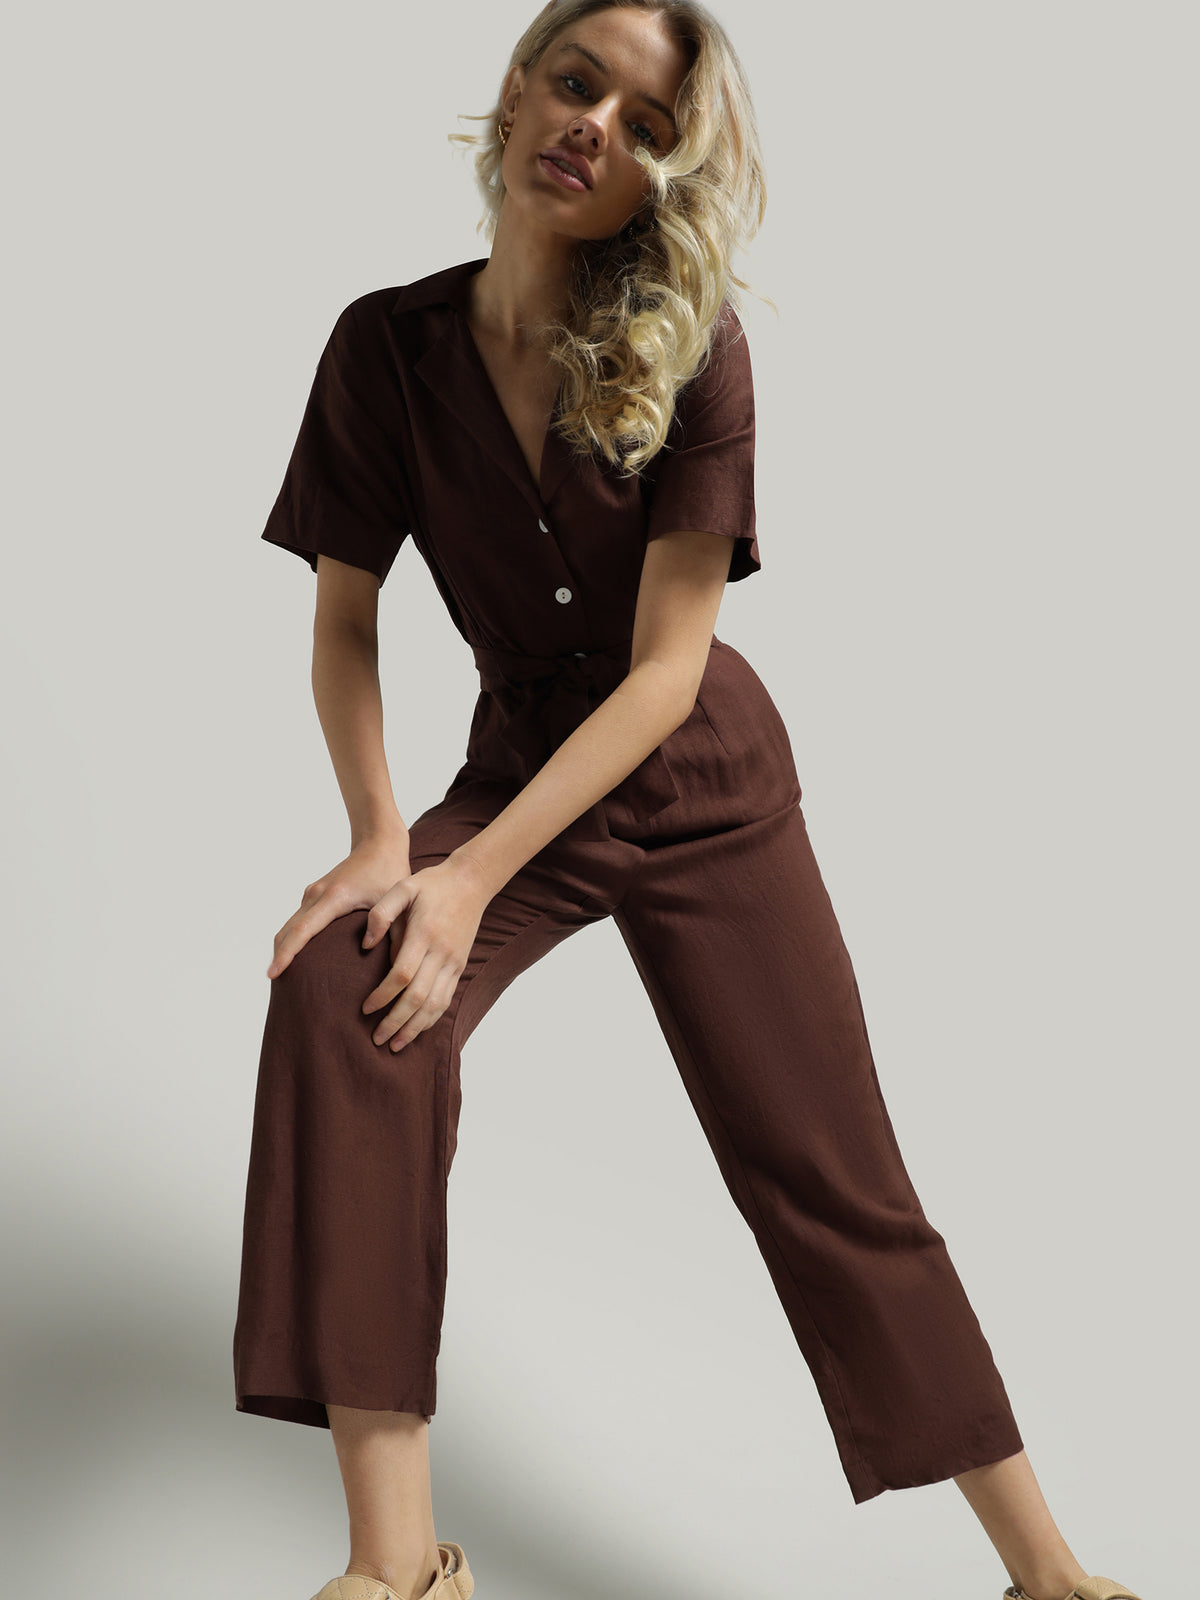 Solange Jumpsuit in Cacao